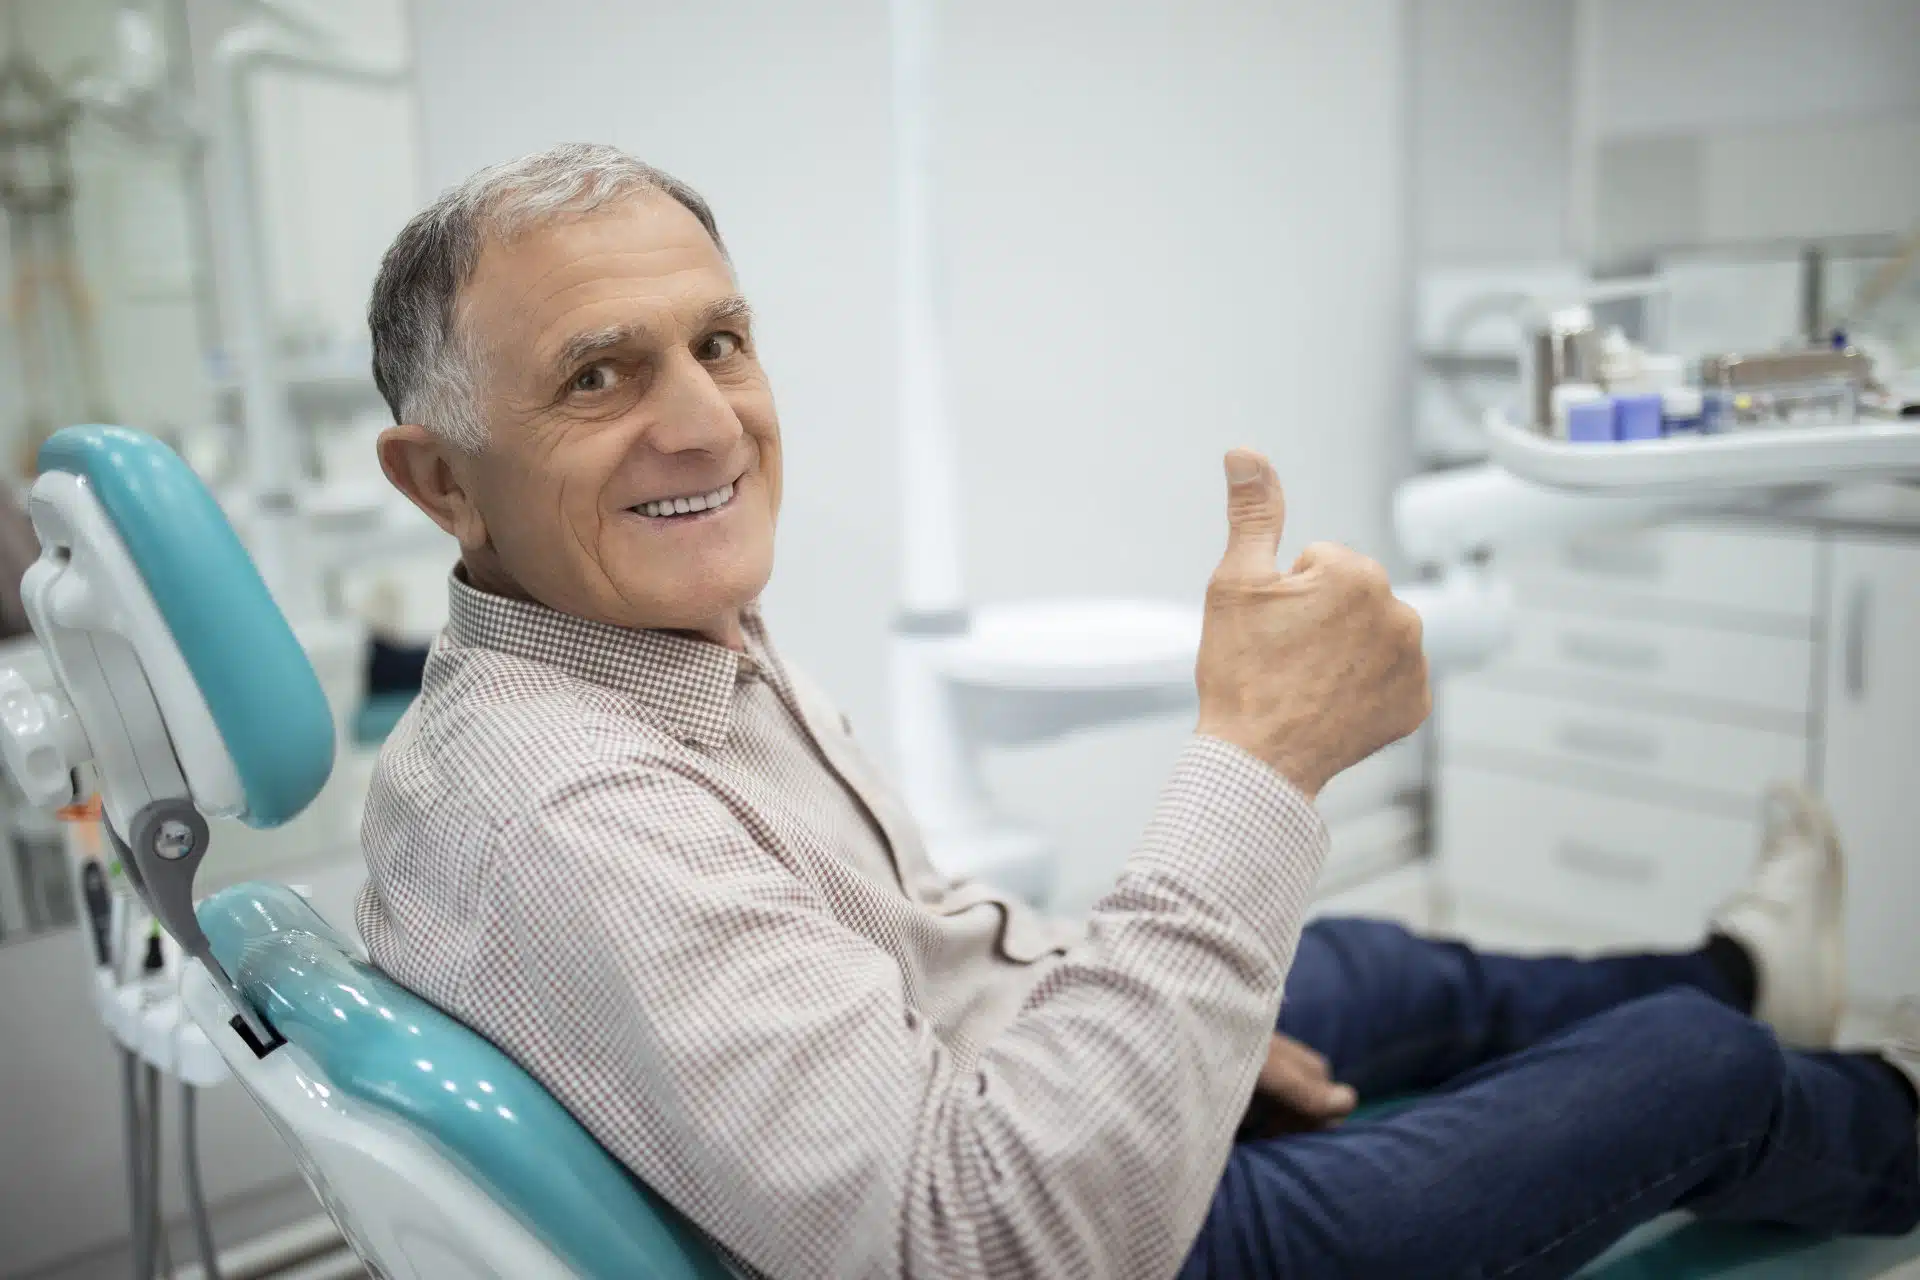 With our nitrous oxide sedation option, you'll experience a relaxed and stress-free dental visit. Say goodbye to dental anxiety and embrace a comfortable dental experience.